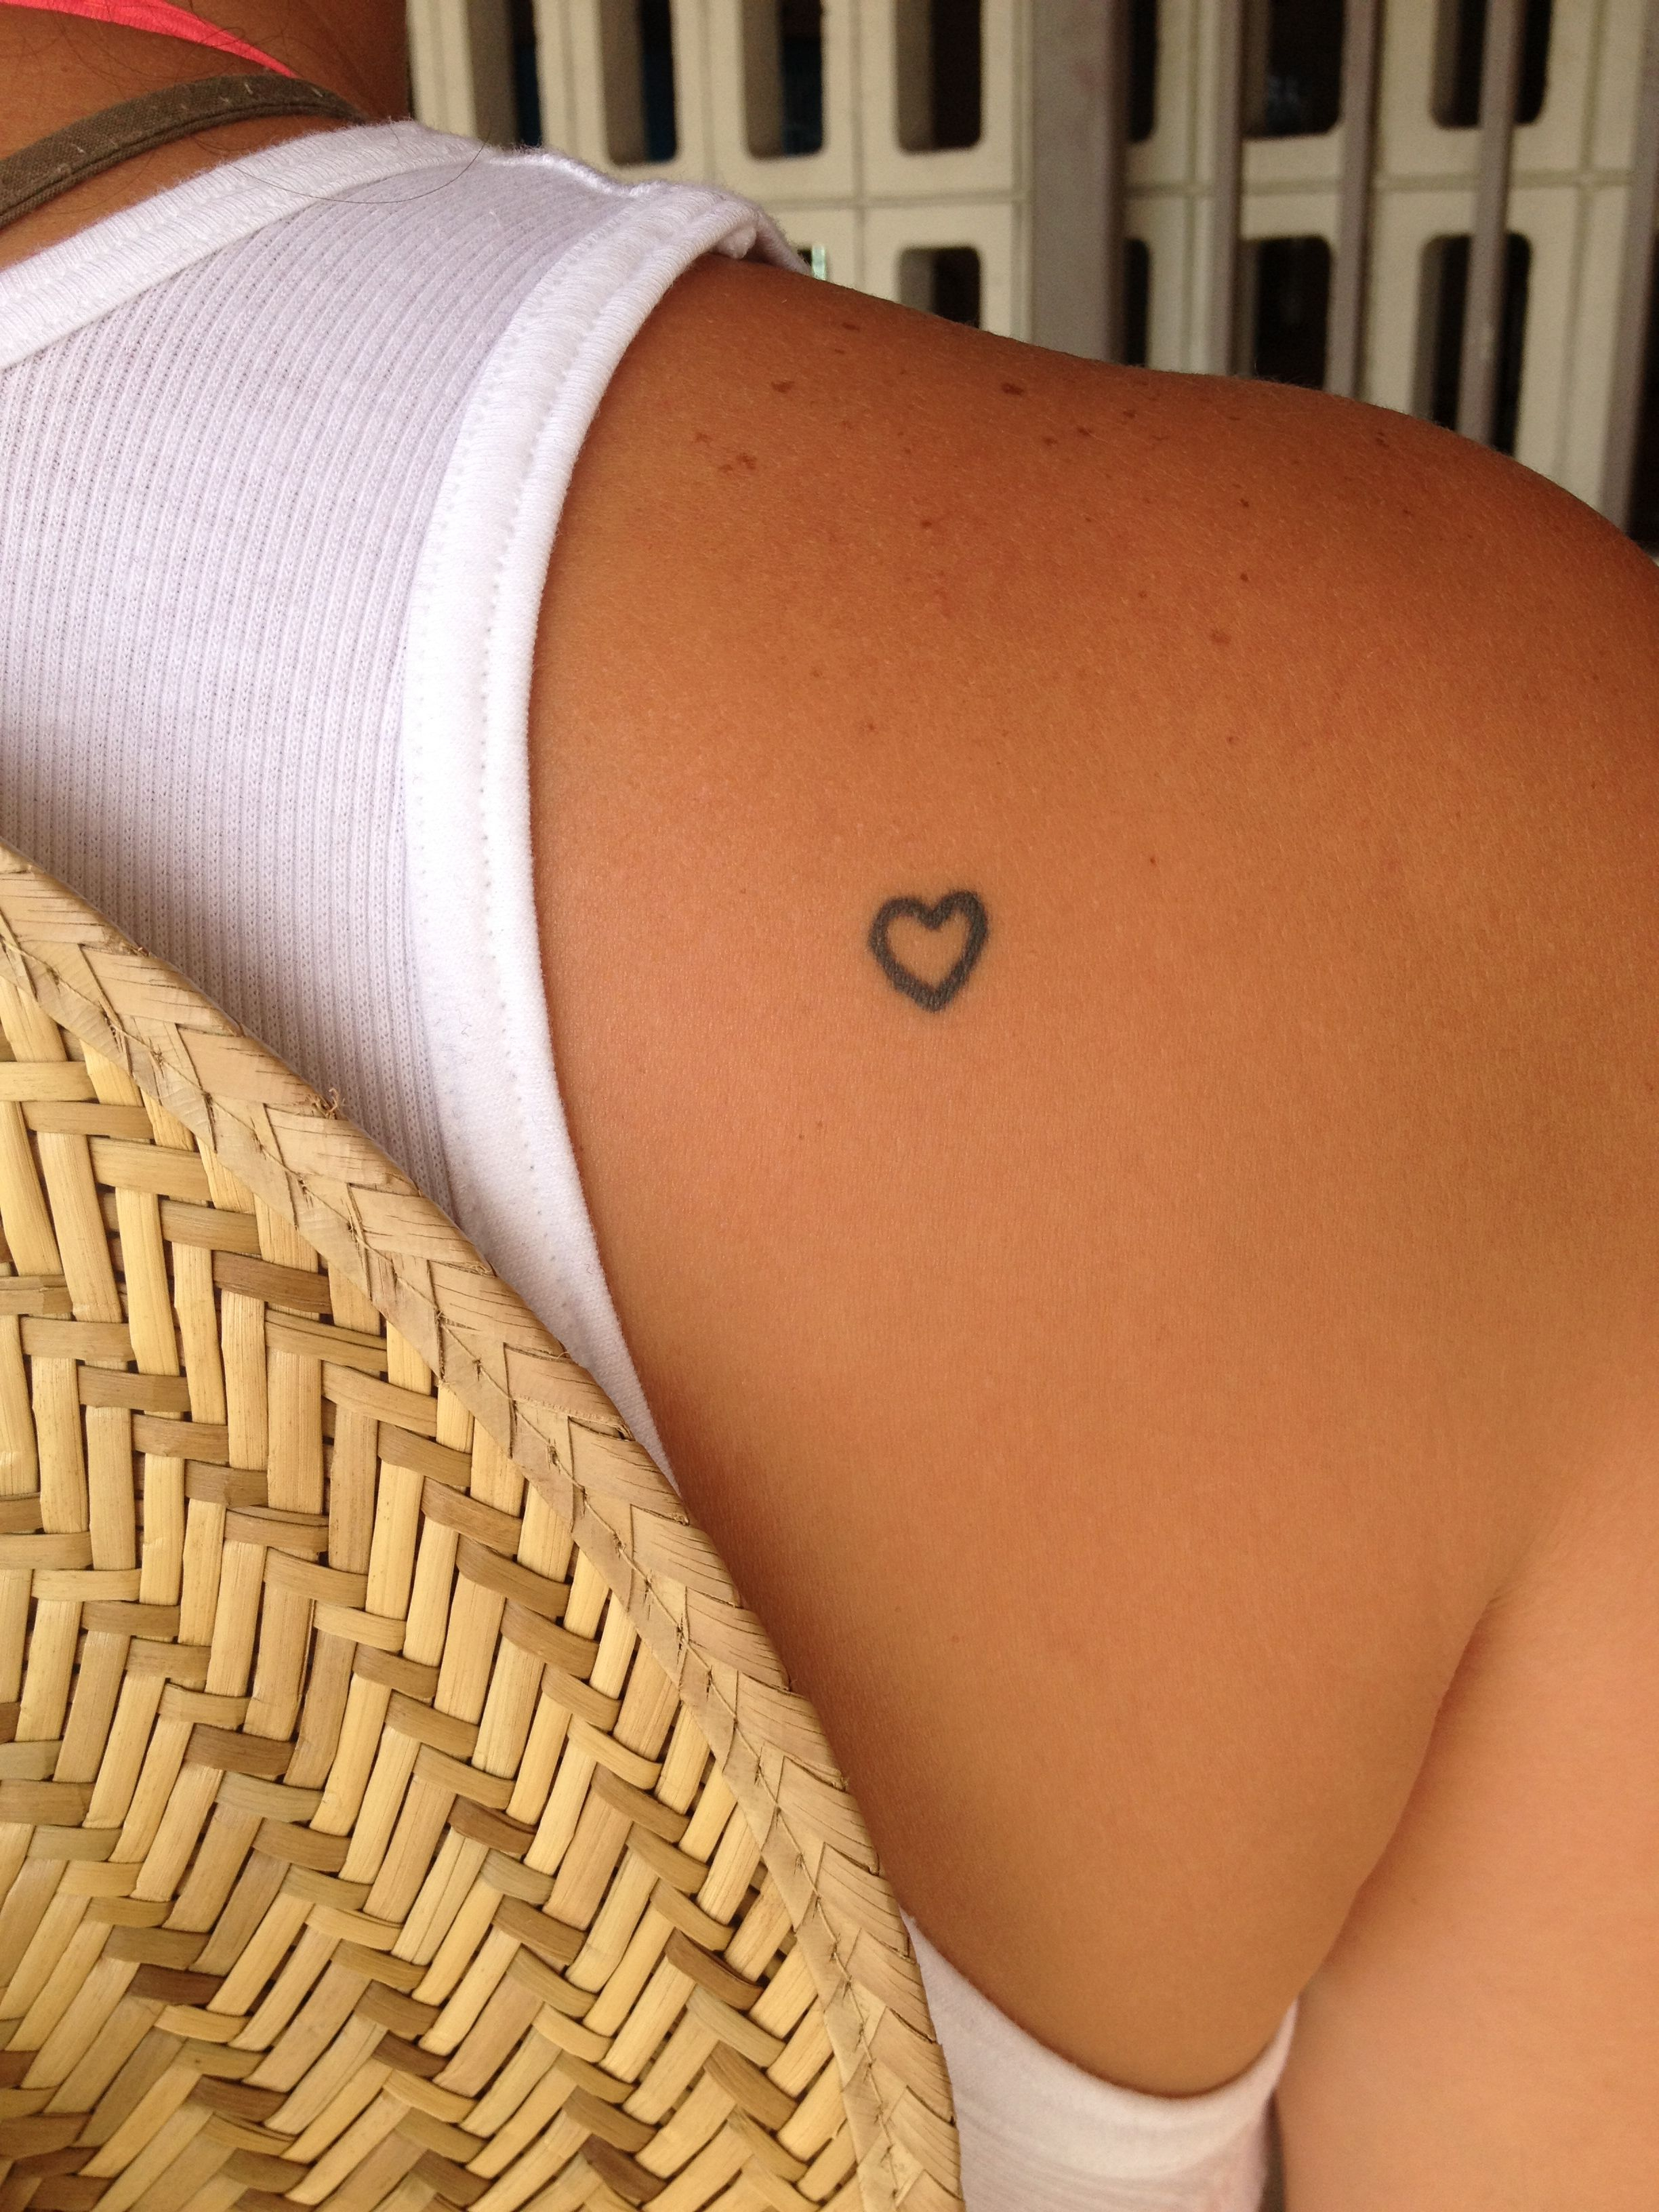 Heart Tattoo On Right Shoulder Blade Ideas Heart Tattoo Shoulder intended for dimensions 2448 X 3264